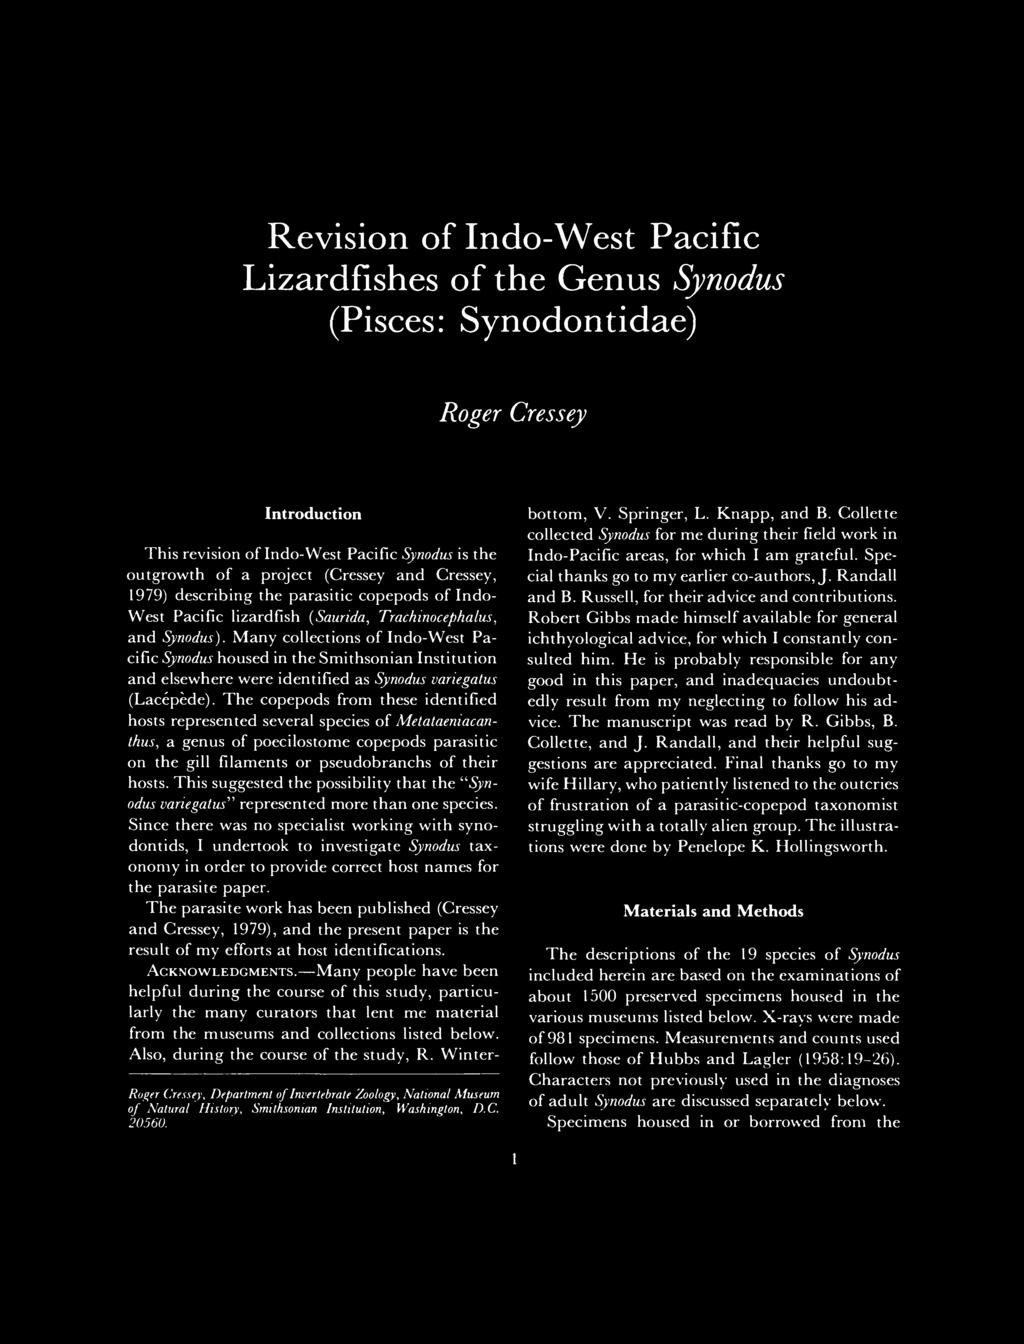 Revision of Indo-West Pacific Lizardfishes of the Genus Synodus (Pisces: Synodontidae) Roger Cressey Introduction This revision of Indo-West Pacific Synodus is the outgrowth of a project (Cressey and